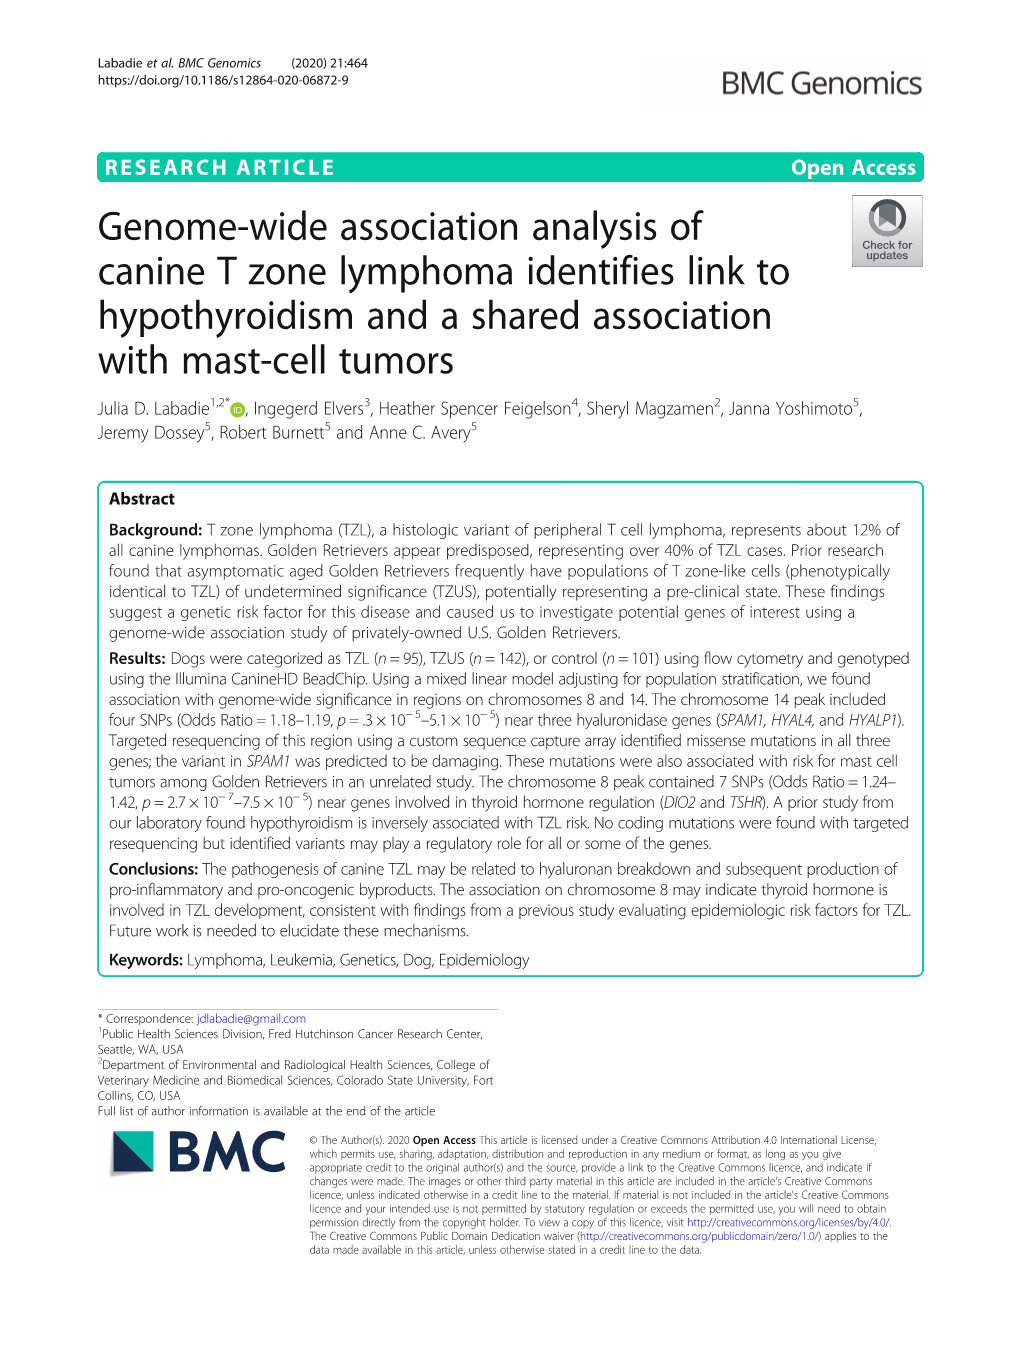 Genome-Wide Association Analysis of Canine T Zone Lymphoma Identifies Link to Hypothyroidism and a Shared Association with Mast-Cell Tumors Julia D